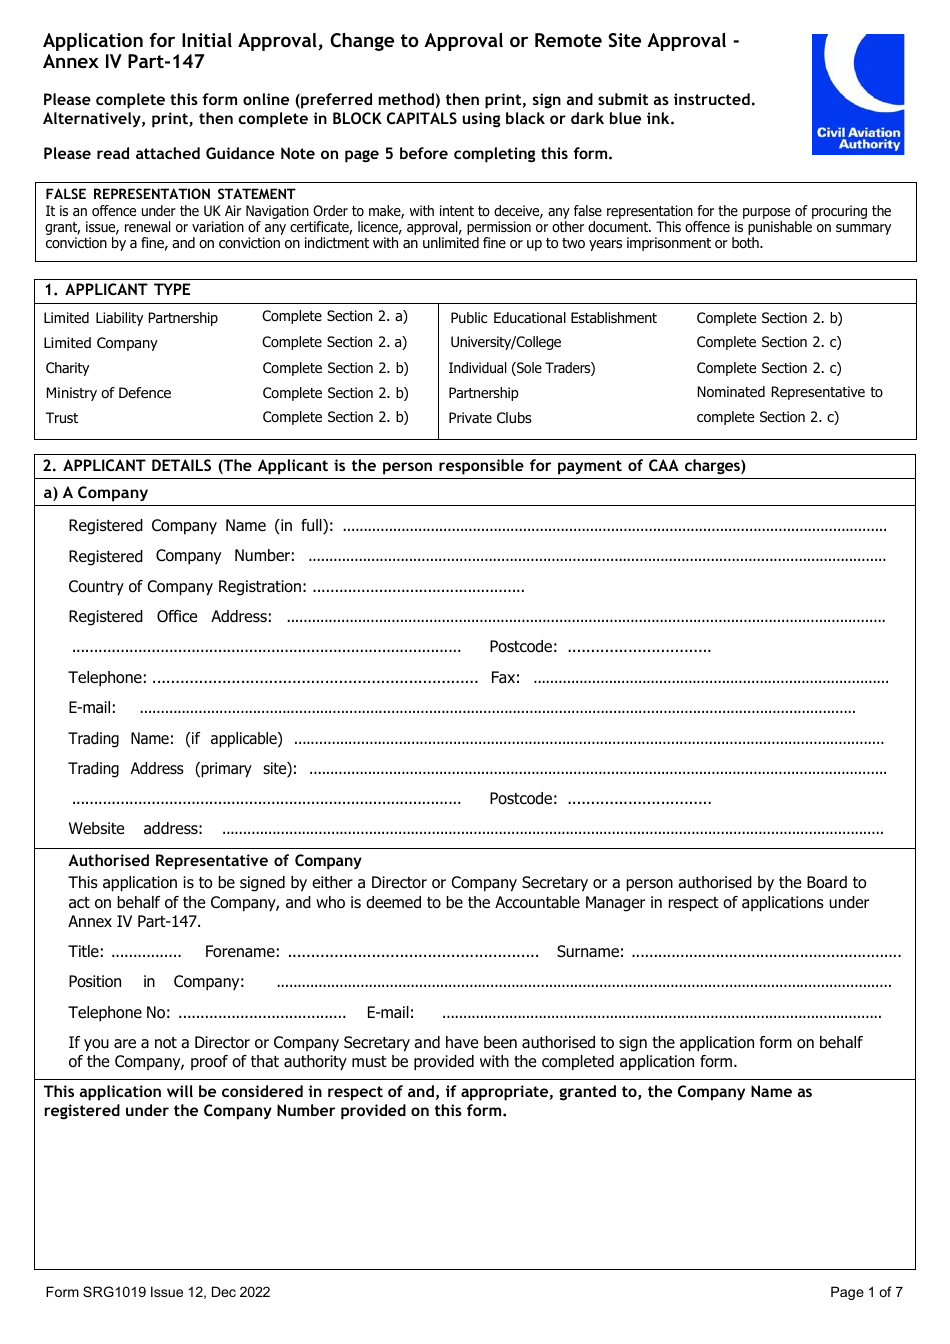 Form SRG1019 Application for Initial Approval, Change to Approval or Remote Site Approval Under Ec Regulation 1321 / 2014 Annex IV Part-147 - United Kingdom, Page 1